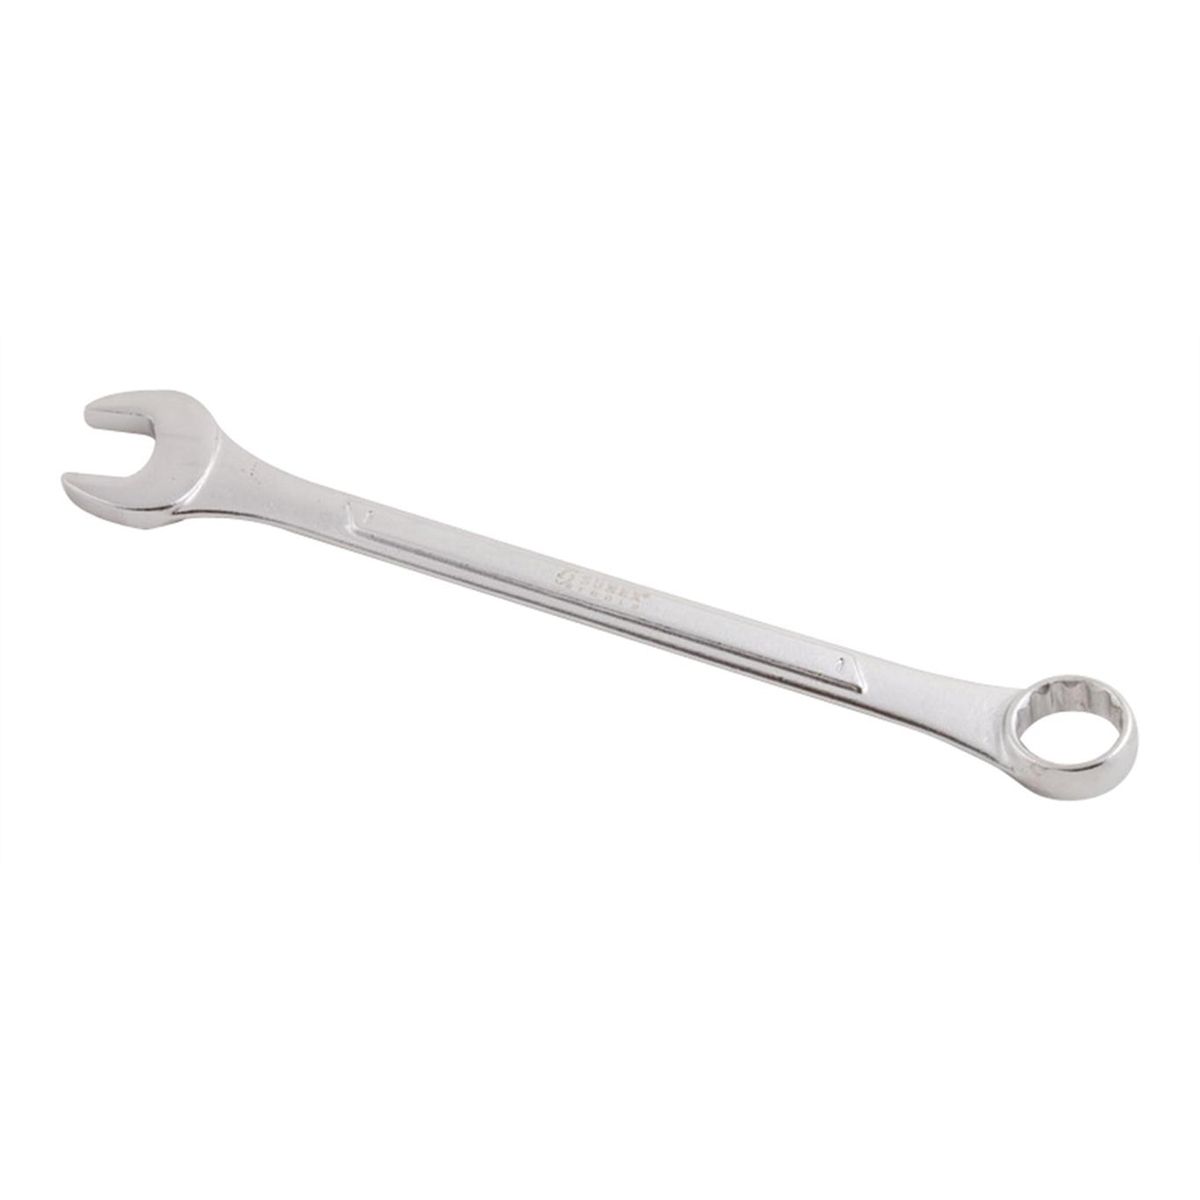 Fractional SAE Raised Panel Combination Wrench 1 Inch